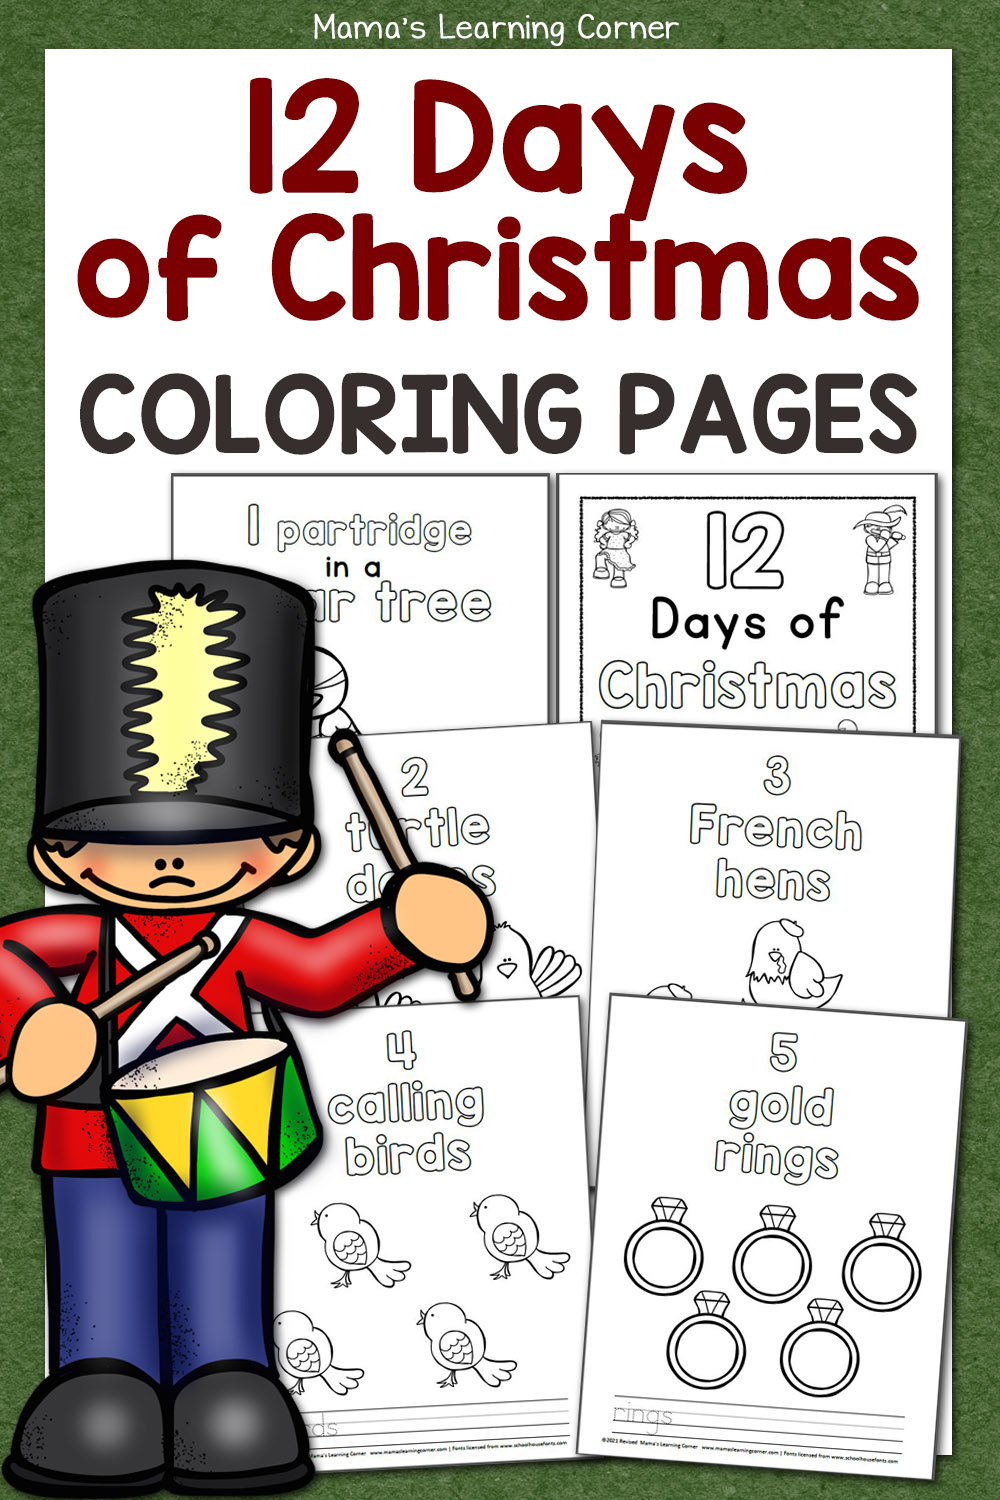 20 Days of Christmas Coloring Pages   Mamas Learning Corner